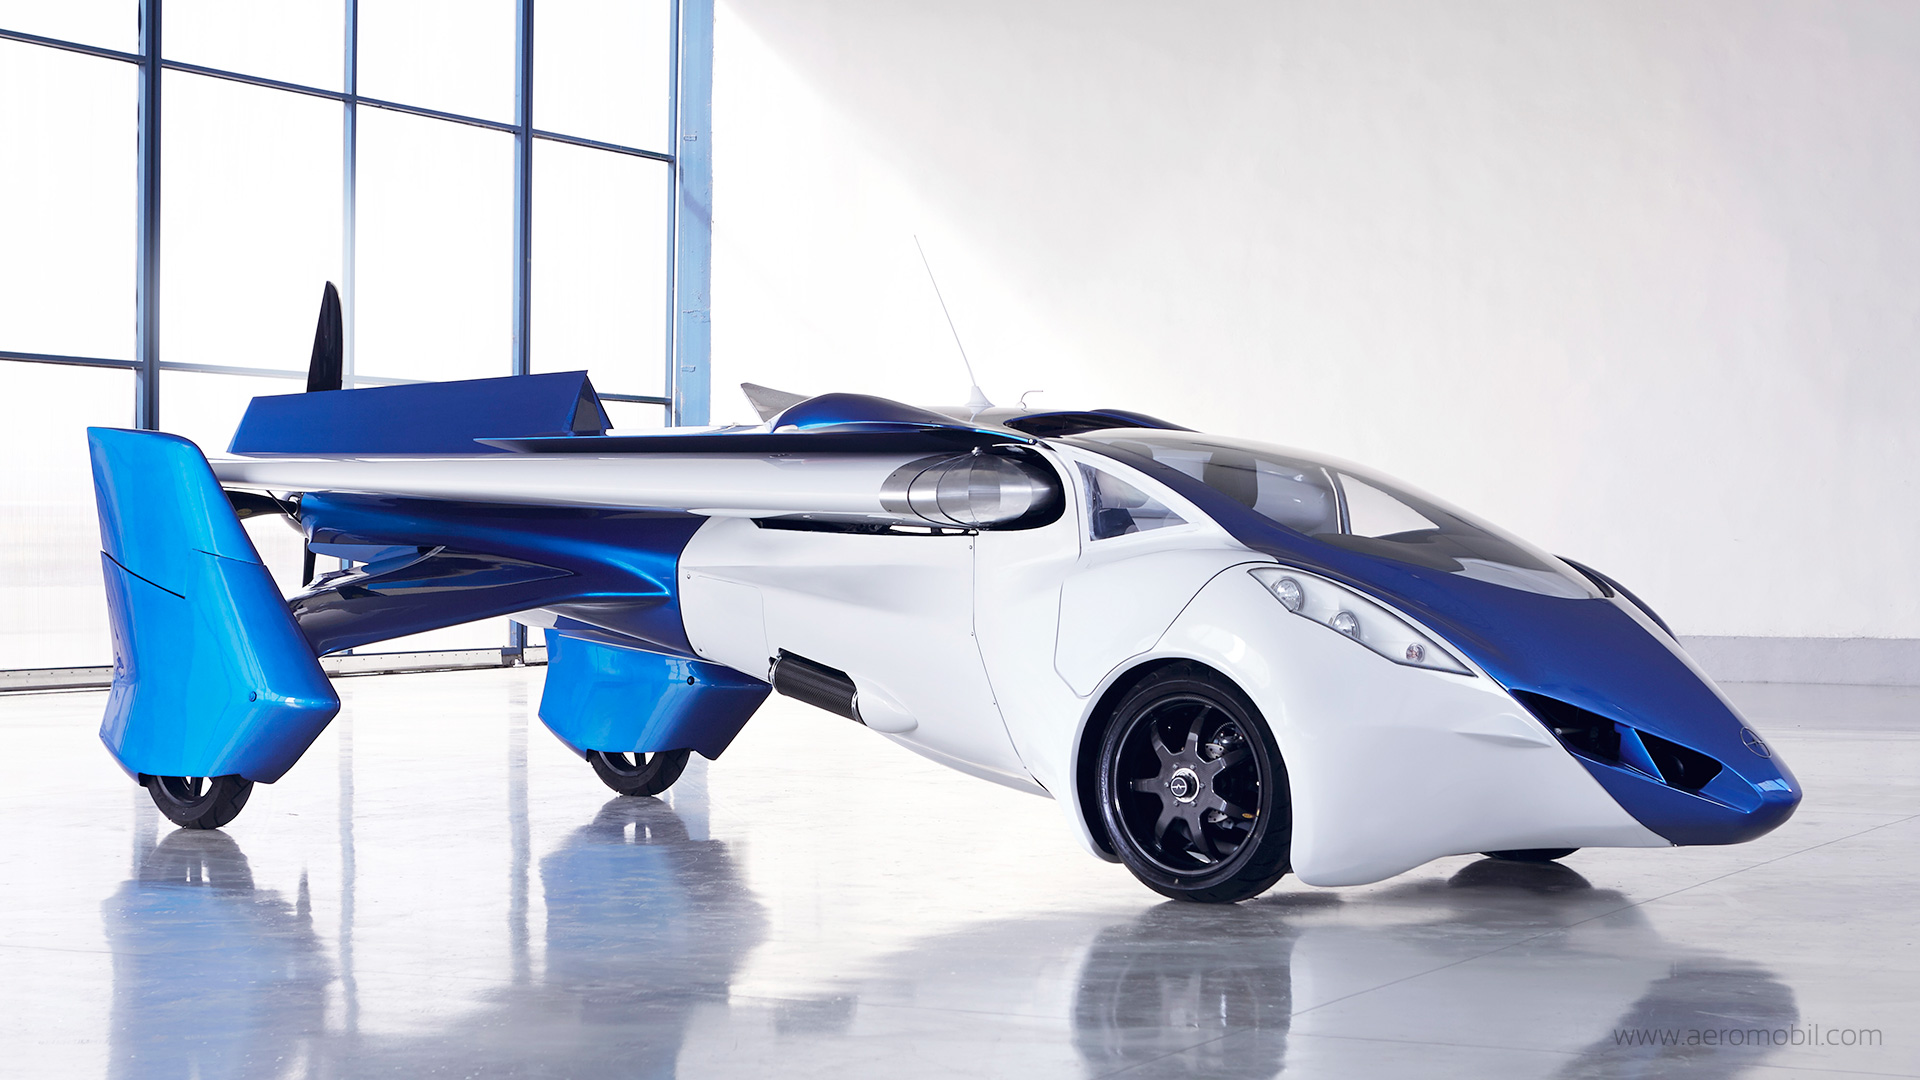 Aeromobil 3.0 ultimate bug out vehicle.